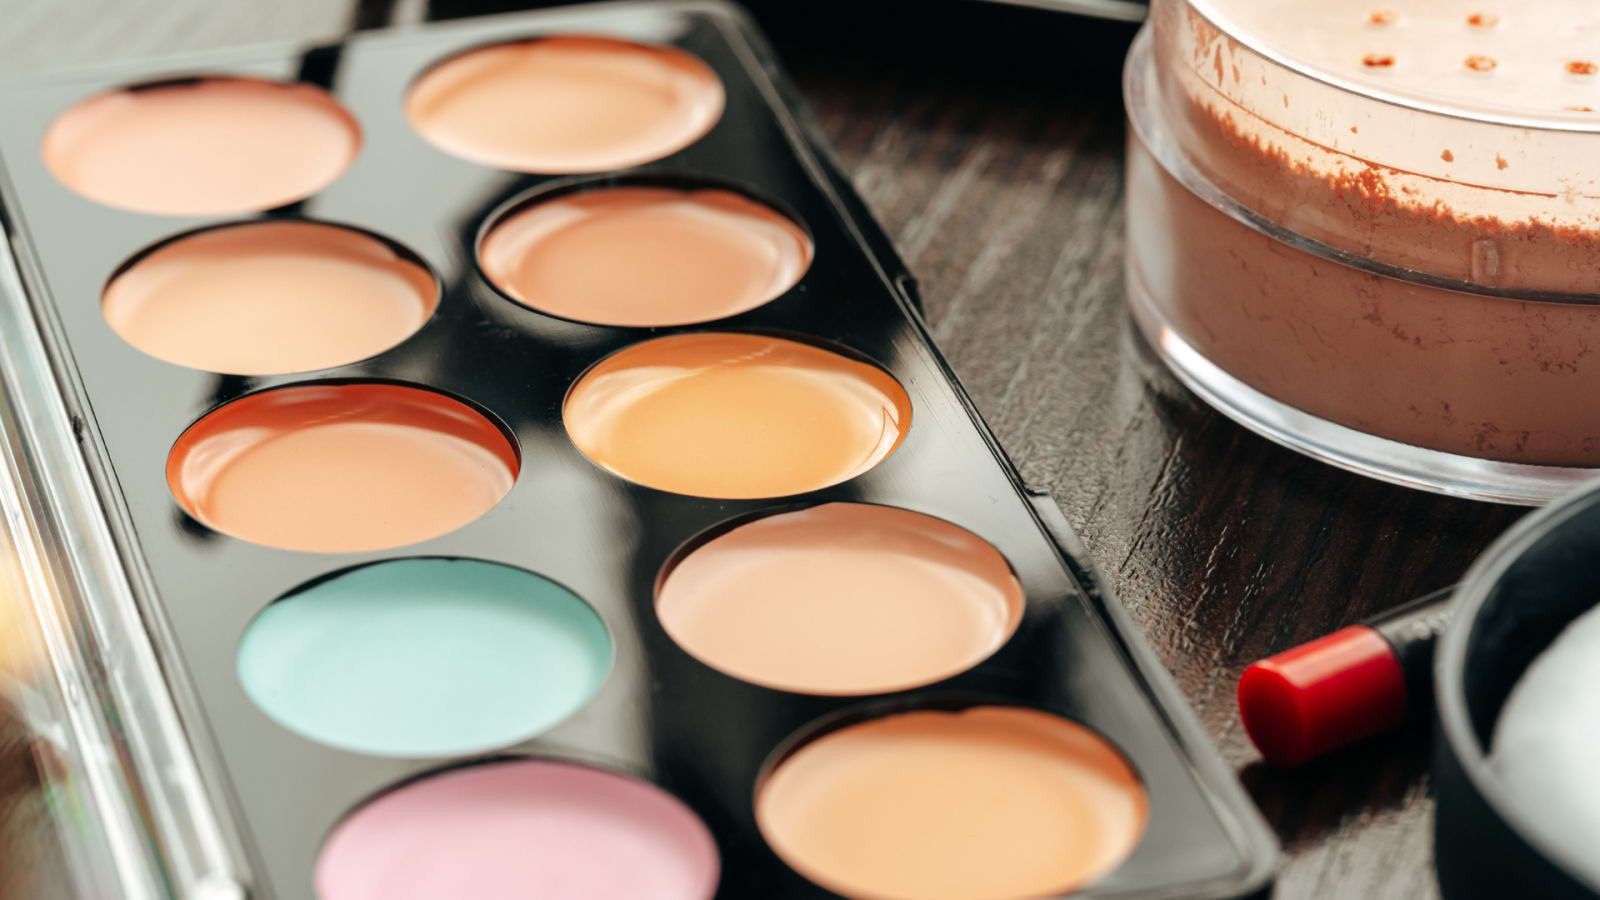 These colour corrector palettes will help you achieve a flawless base